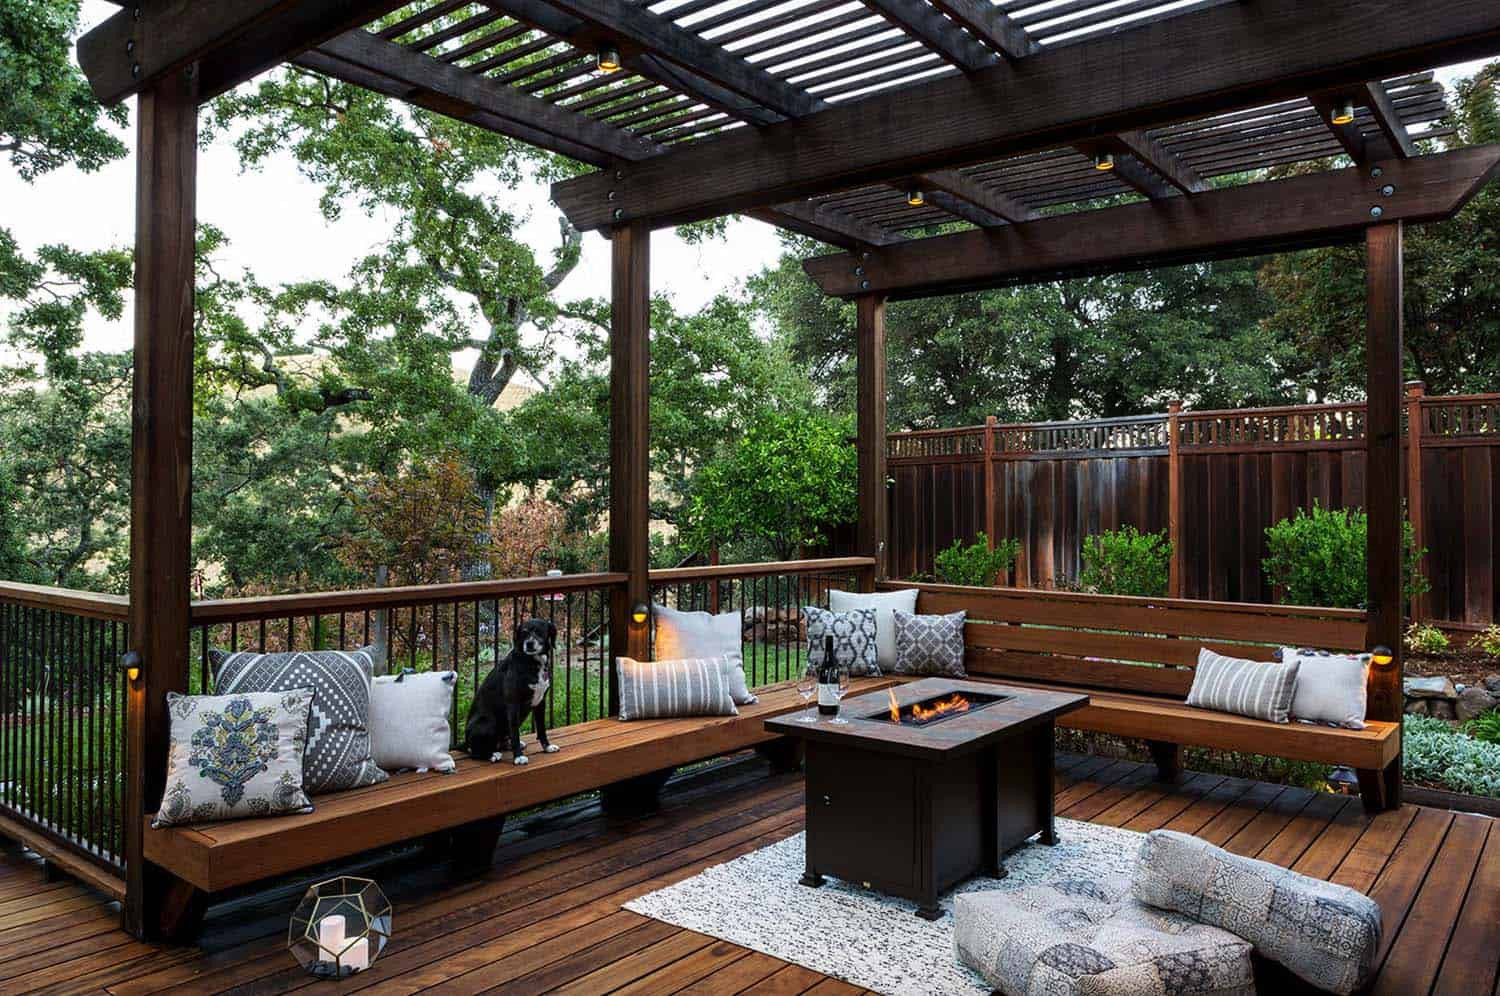 Outdoor Living Space Ideas
 33 Fabulous Ideas For Creating Beautiful Outdoor Living Spaces